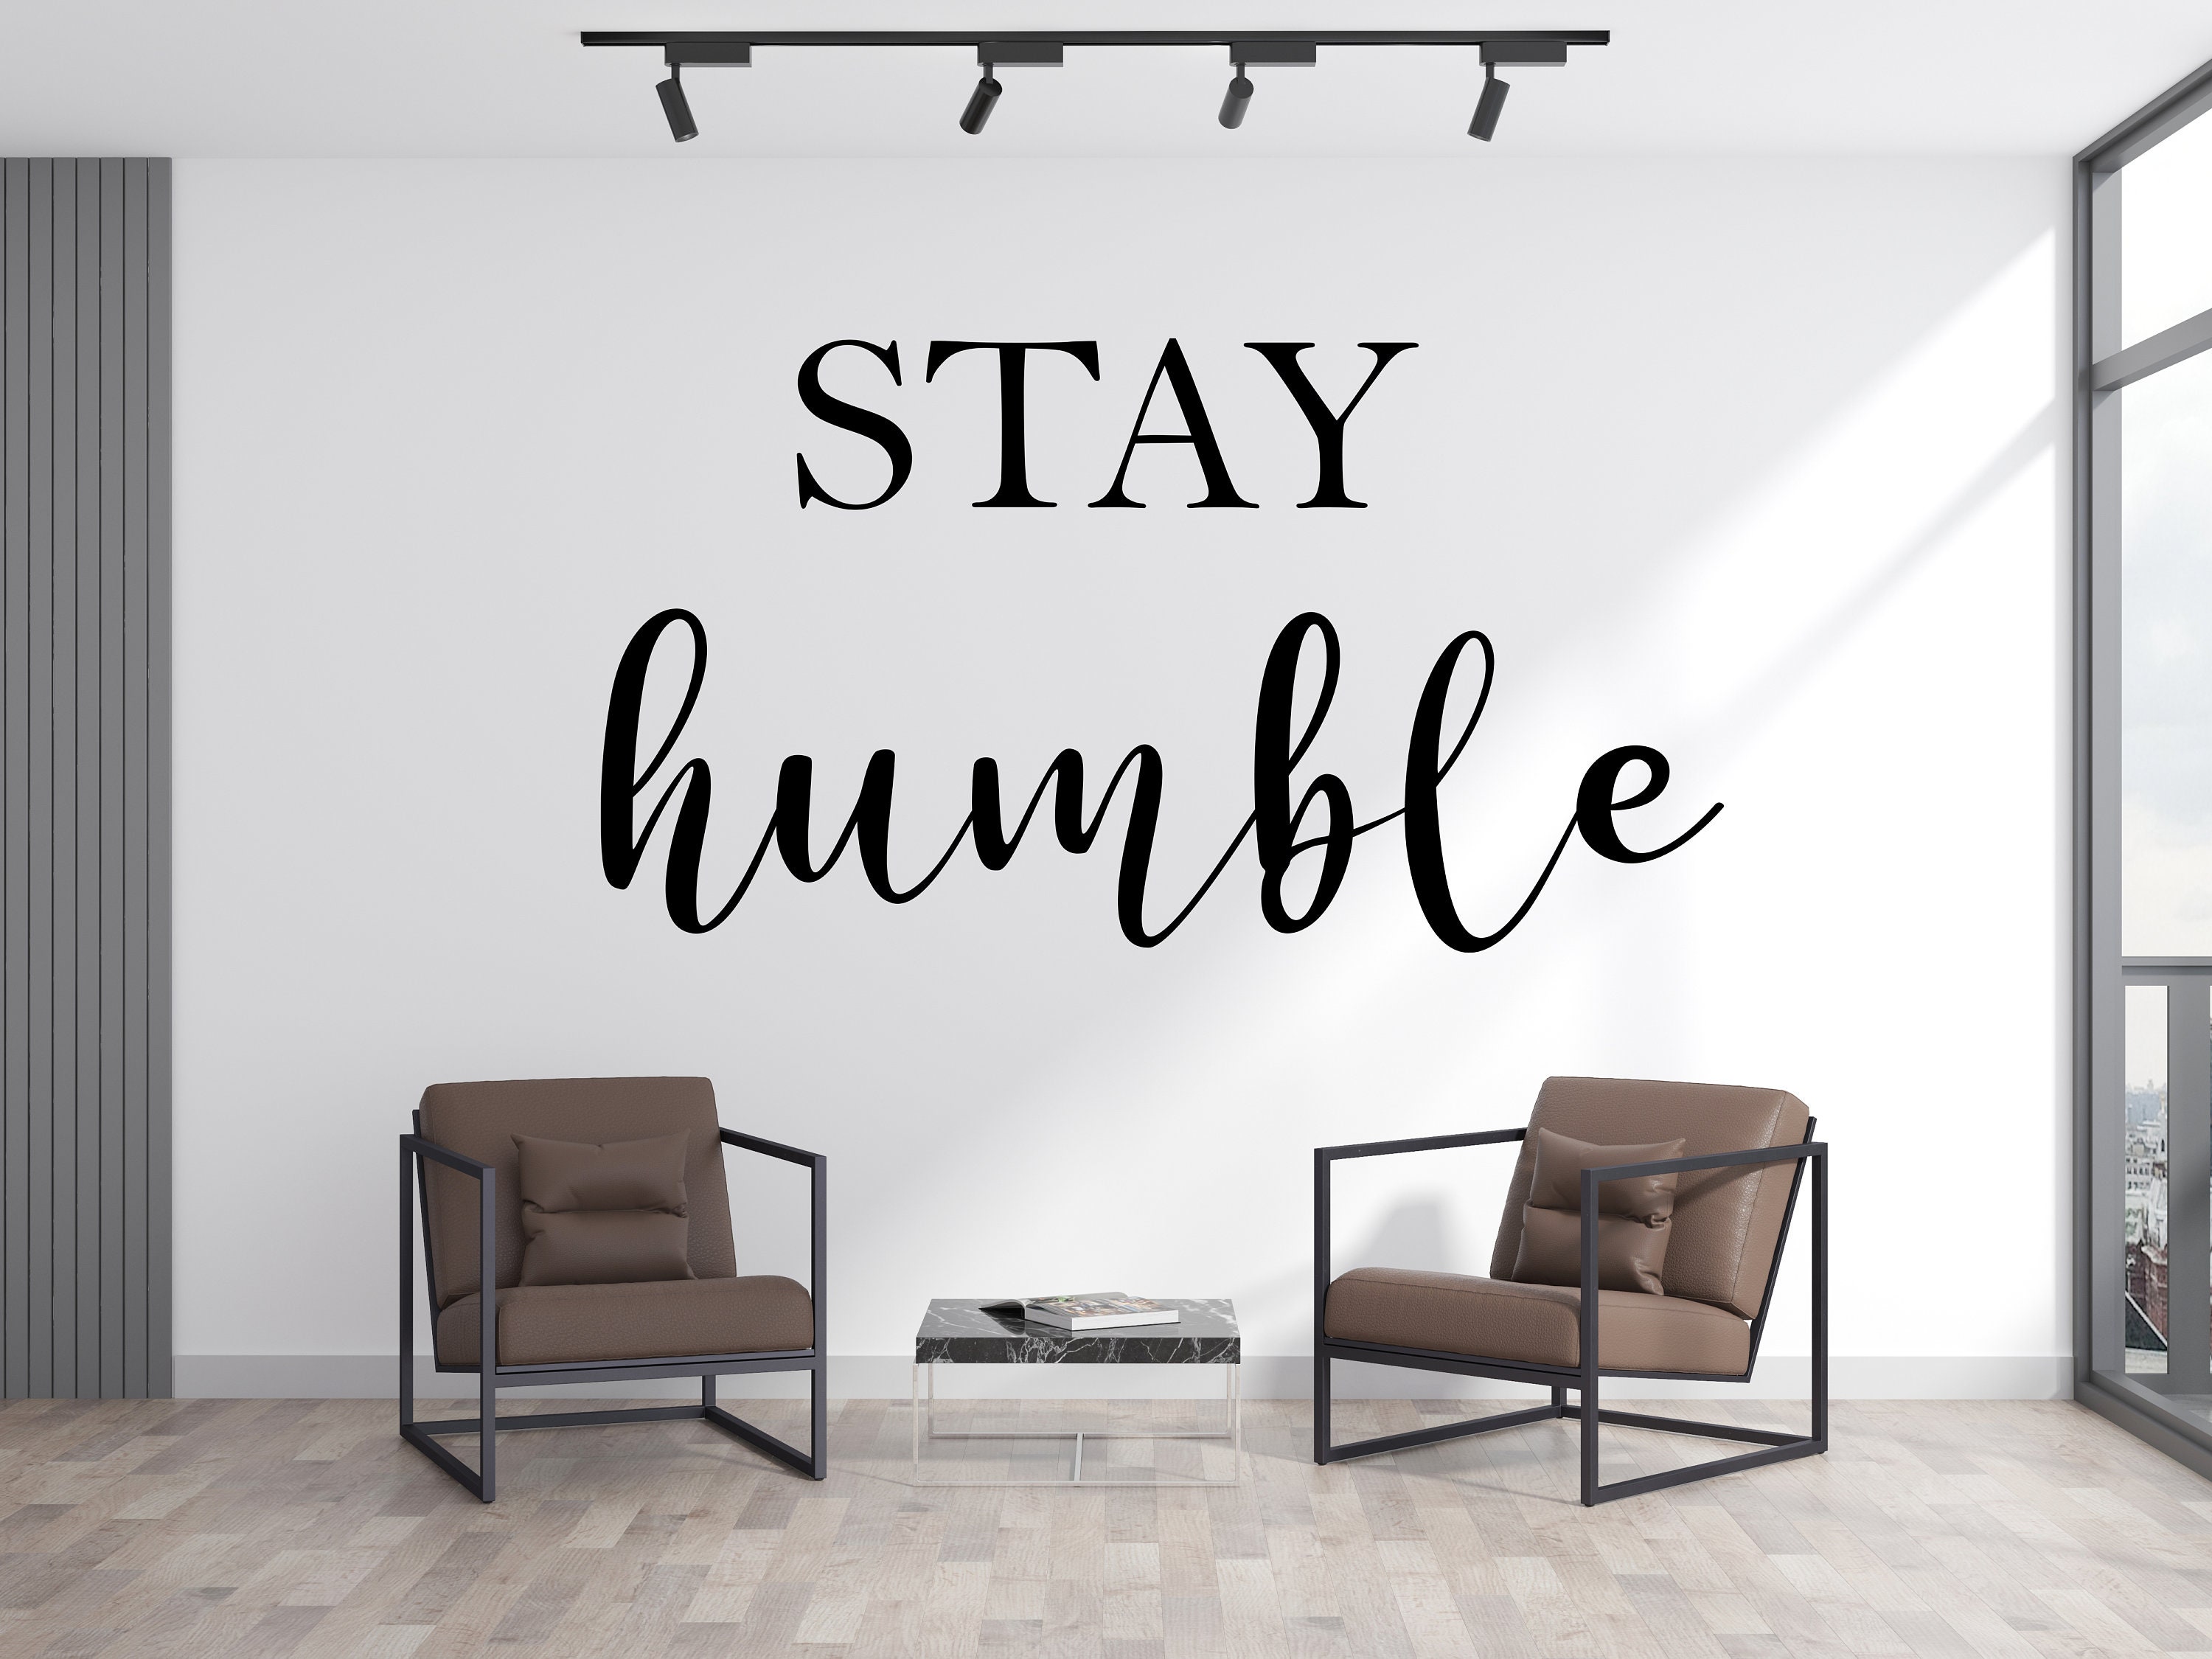 Stay Humble Wall Decal,office Wall Decal,office Wall Sticker,office Wall  Decor,office Wall Art,vinyl Letter,window Sticker,teamwork OFC0006 